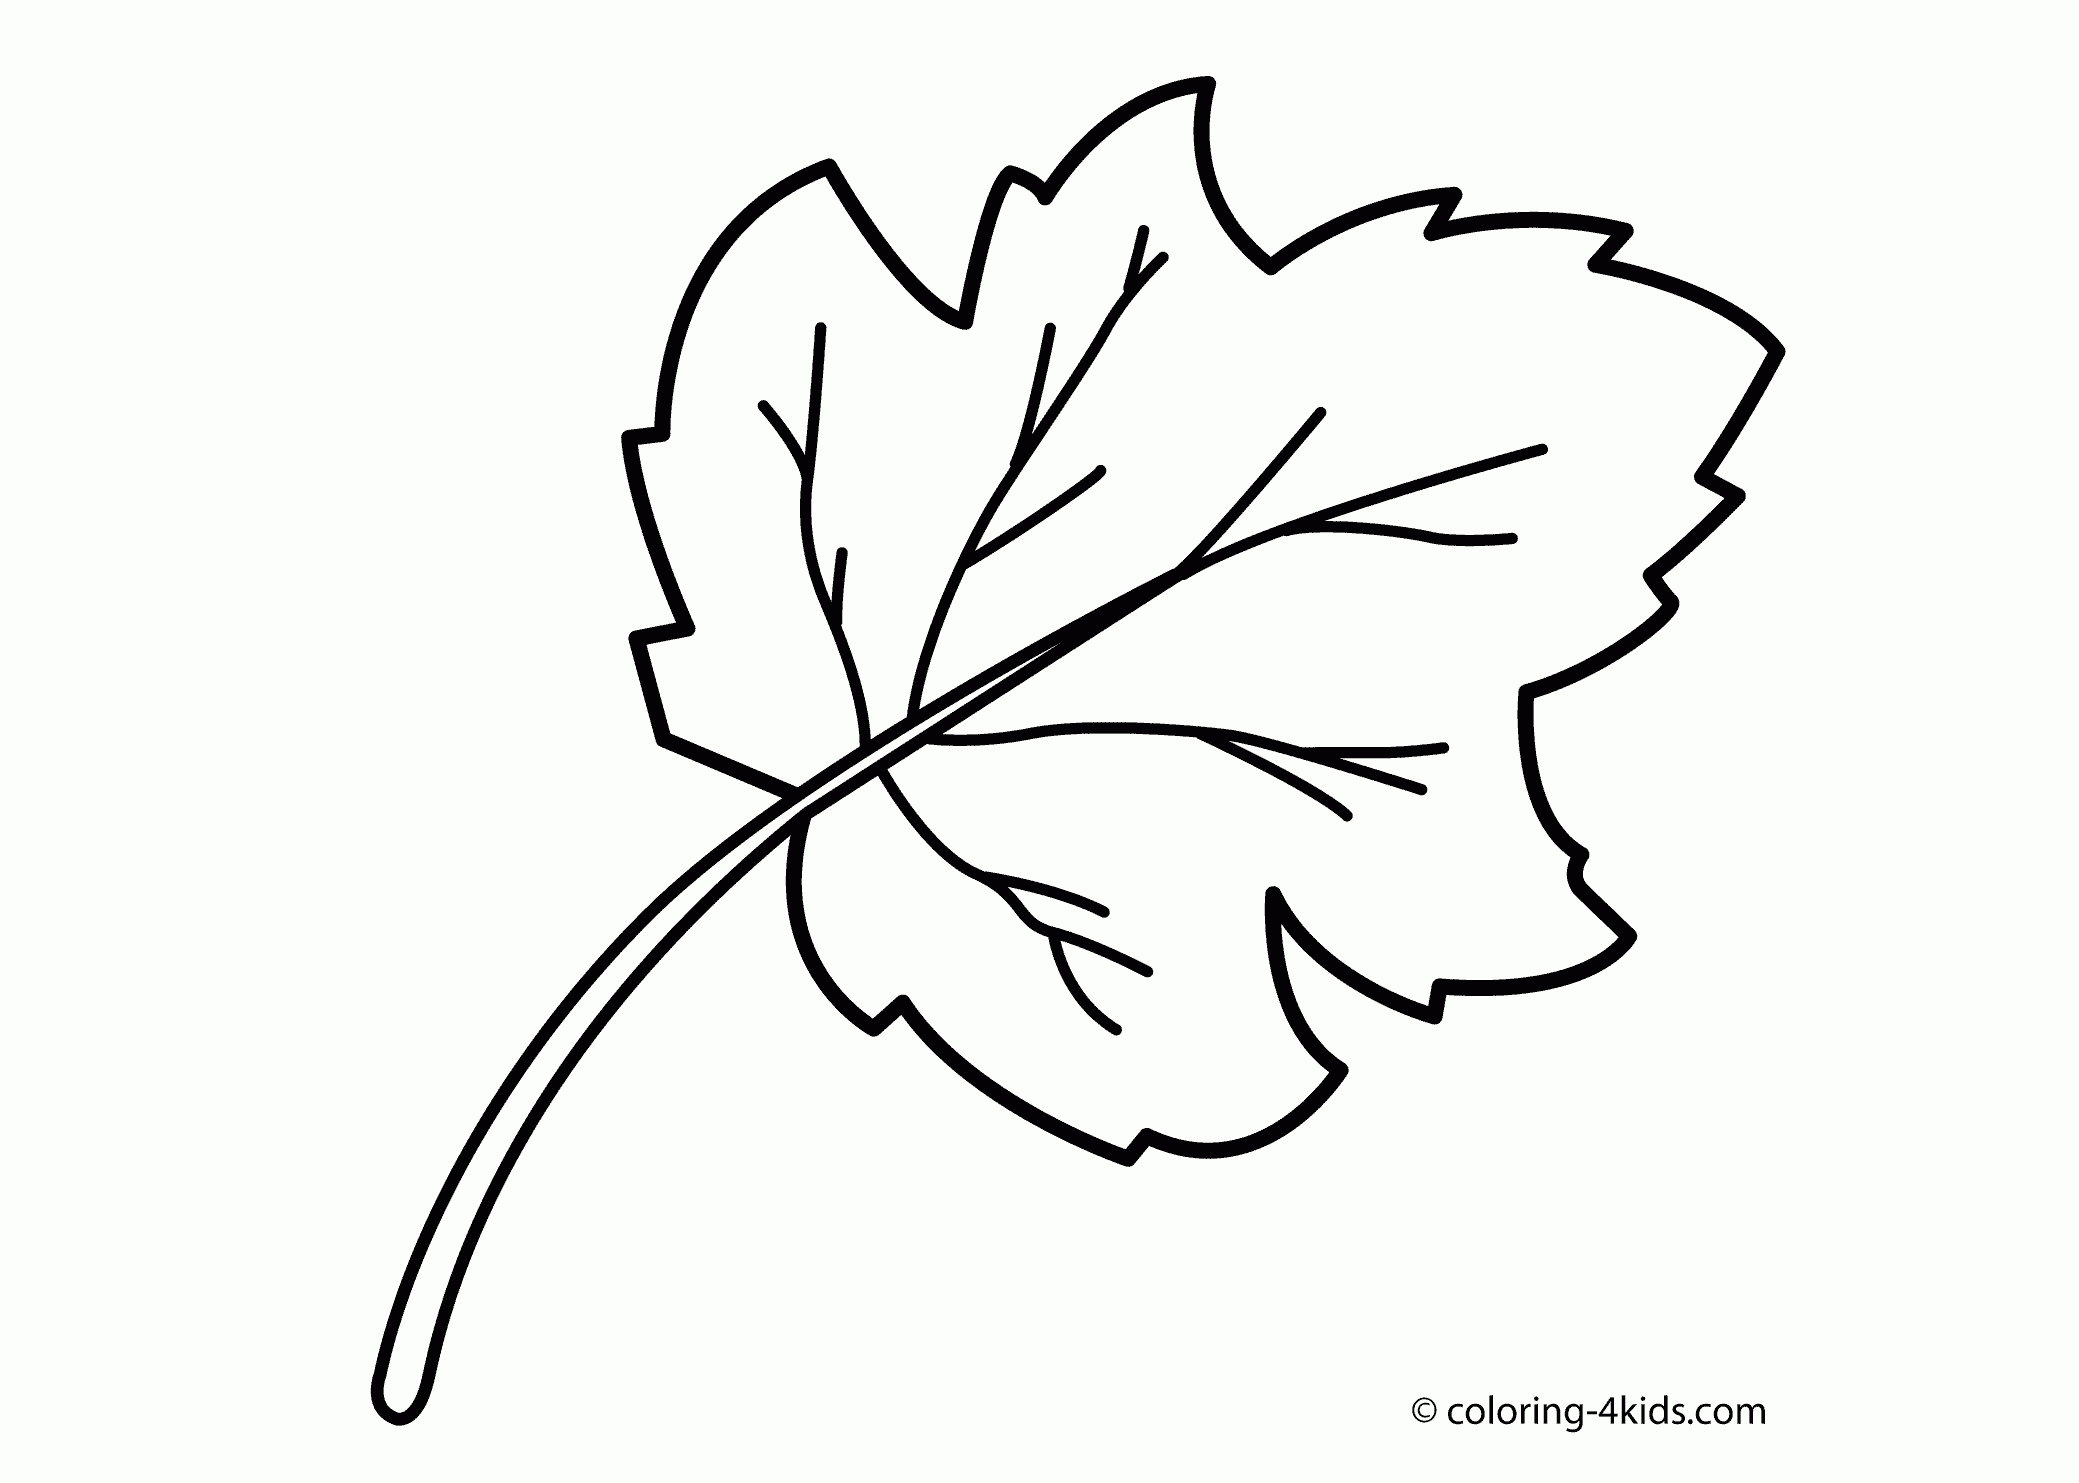 Download Coloring Pages Of Leaves For Trees - Coloring Home